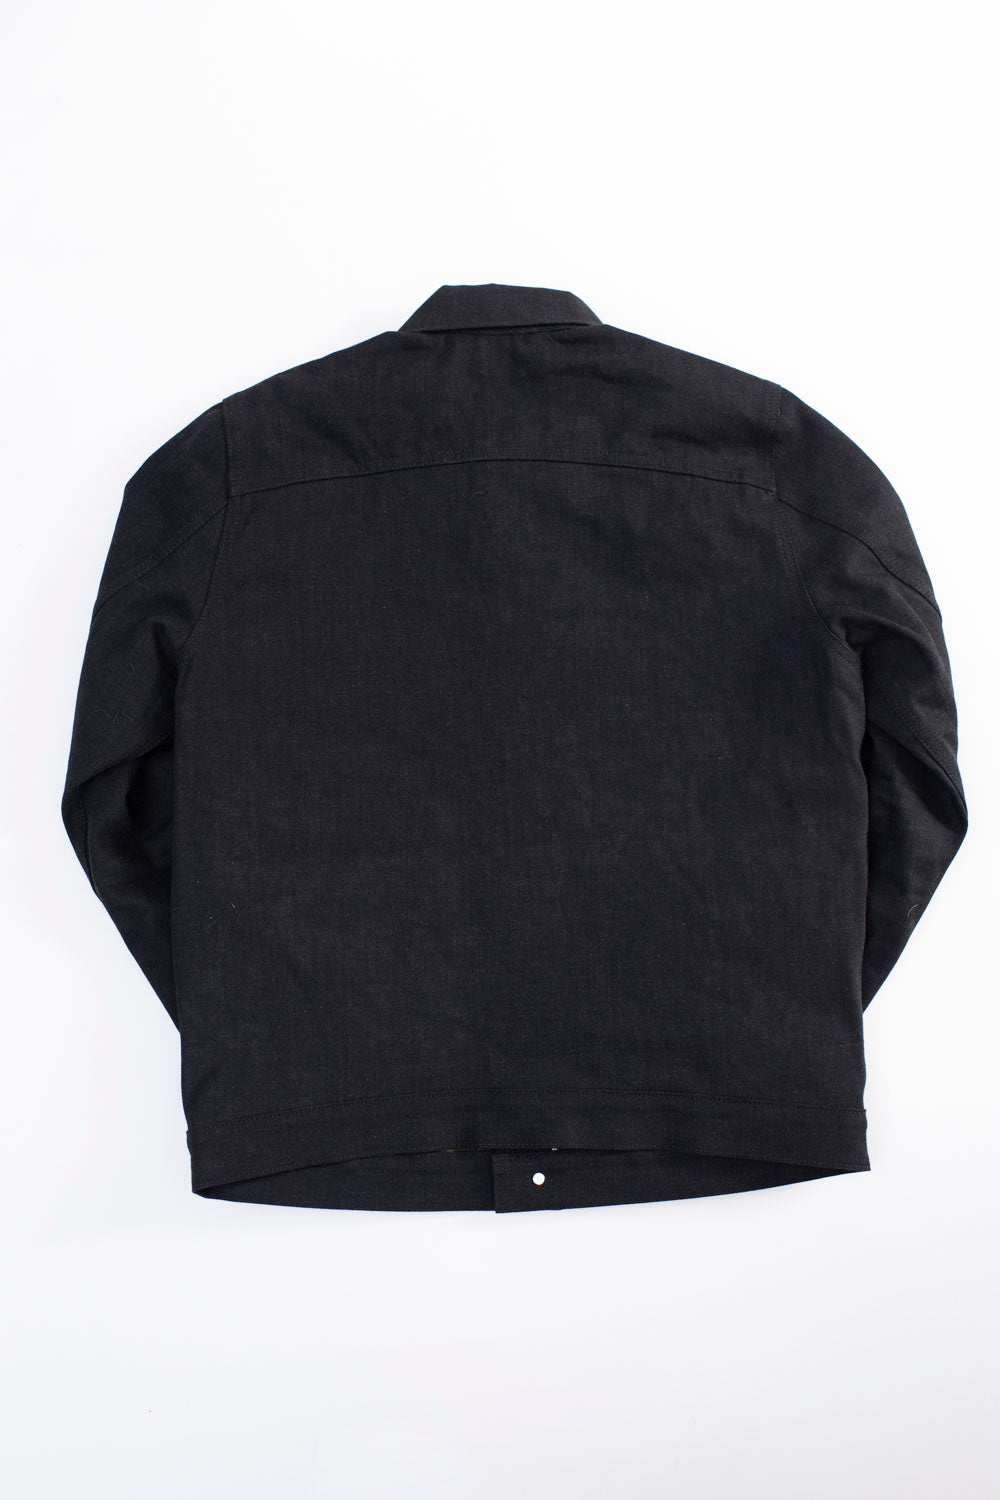 15oz Proprietary Selvedge Lined Cruiser Jacket - Stealth